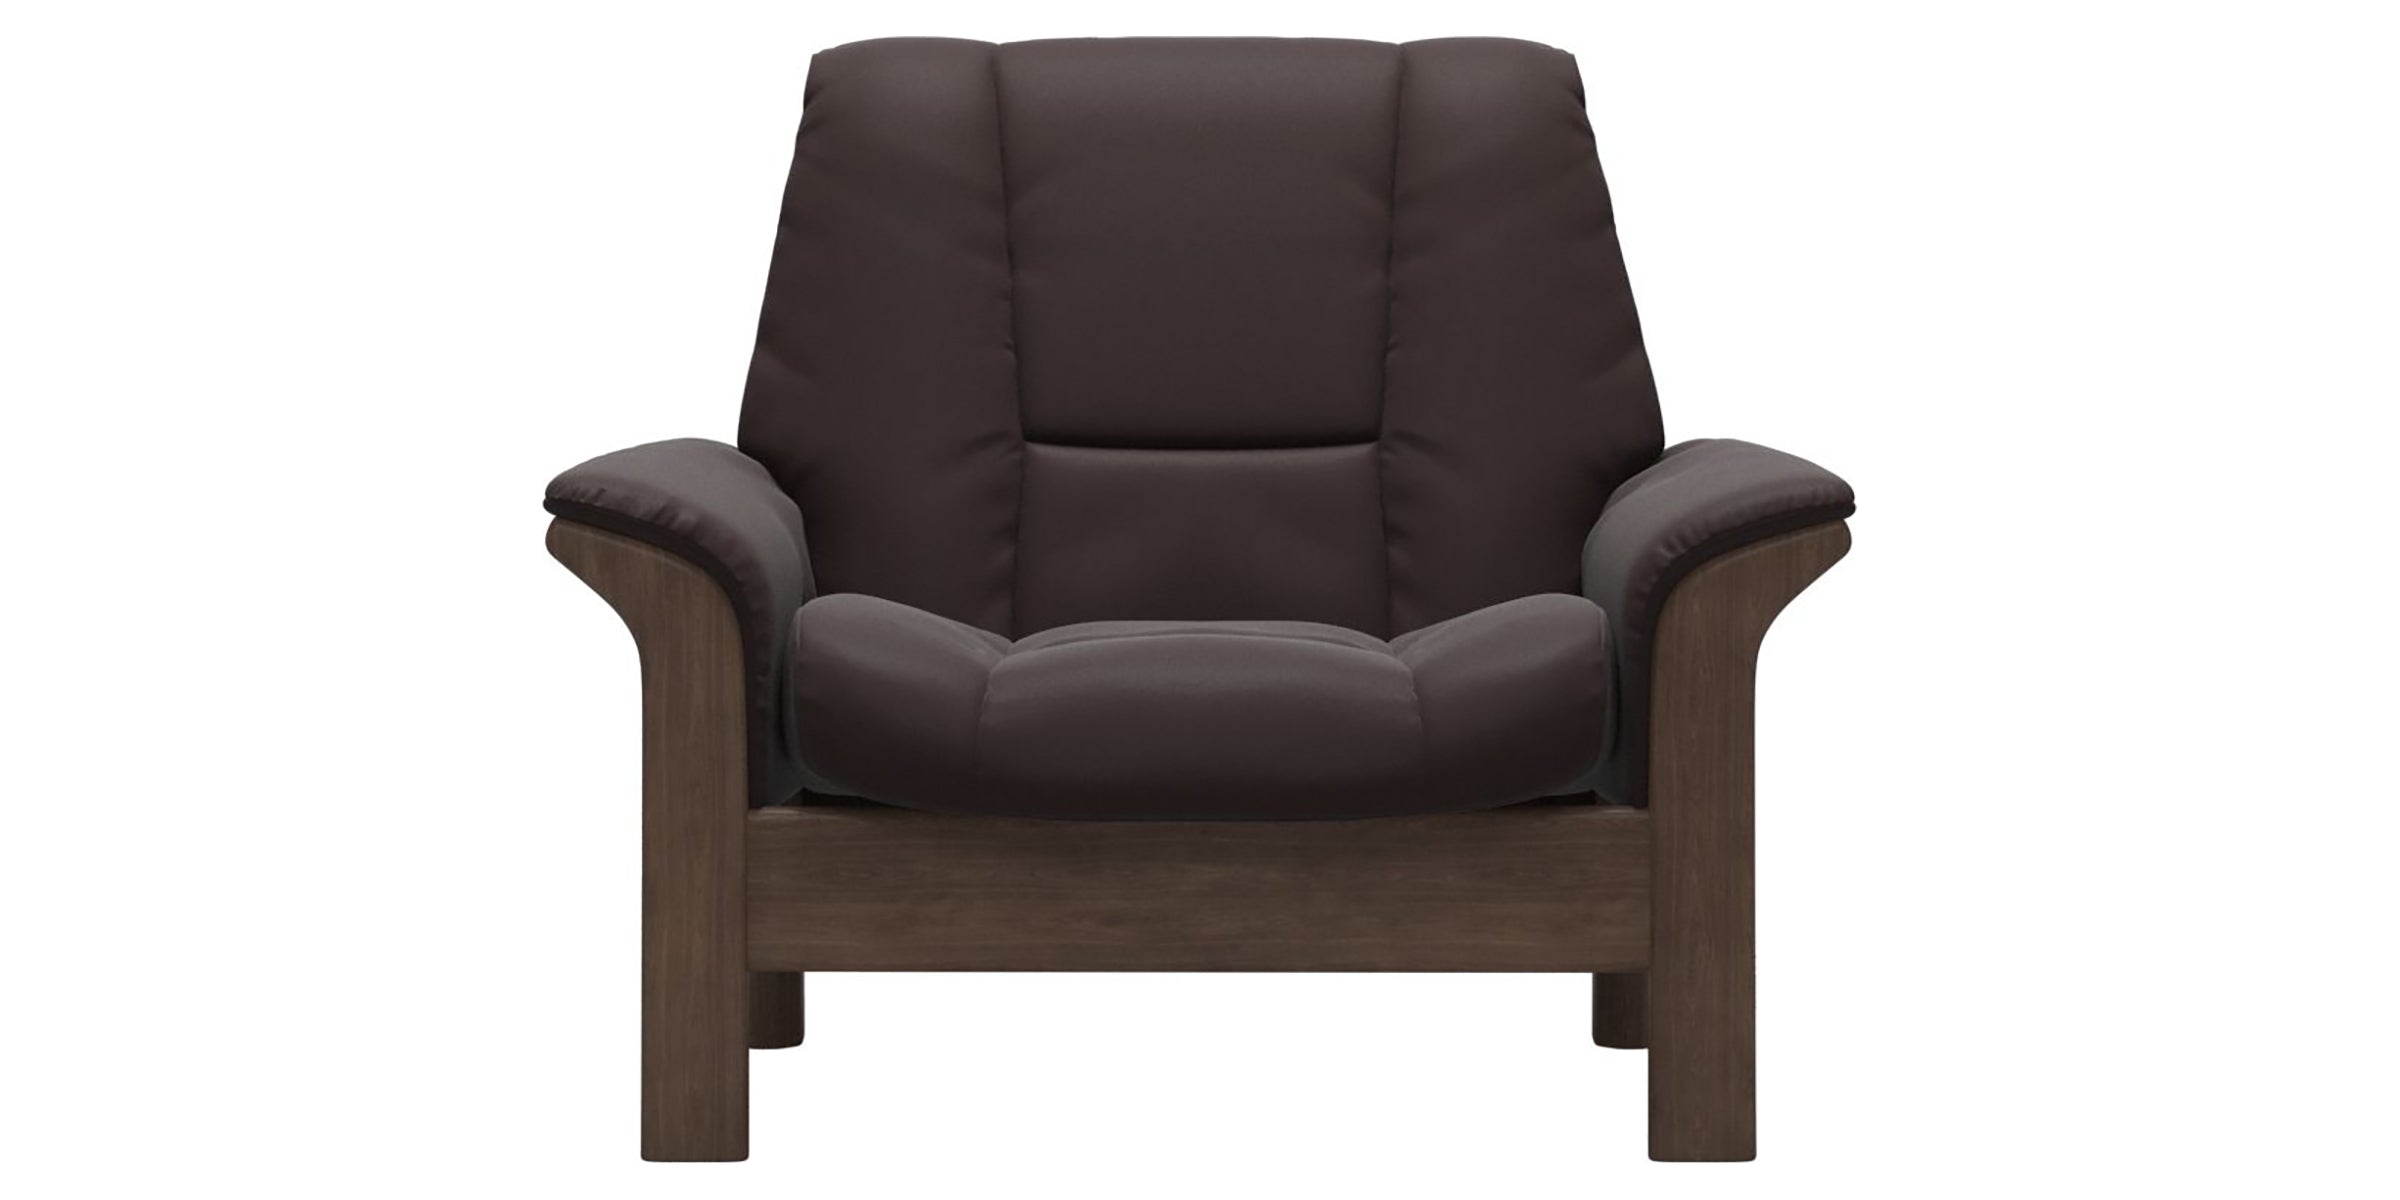 Paloma Leather Chocolate and Walnut Base | Stressless Buckingham Low Back Chair | Valley Ridge Furniture